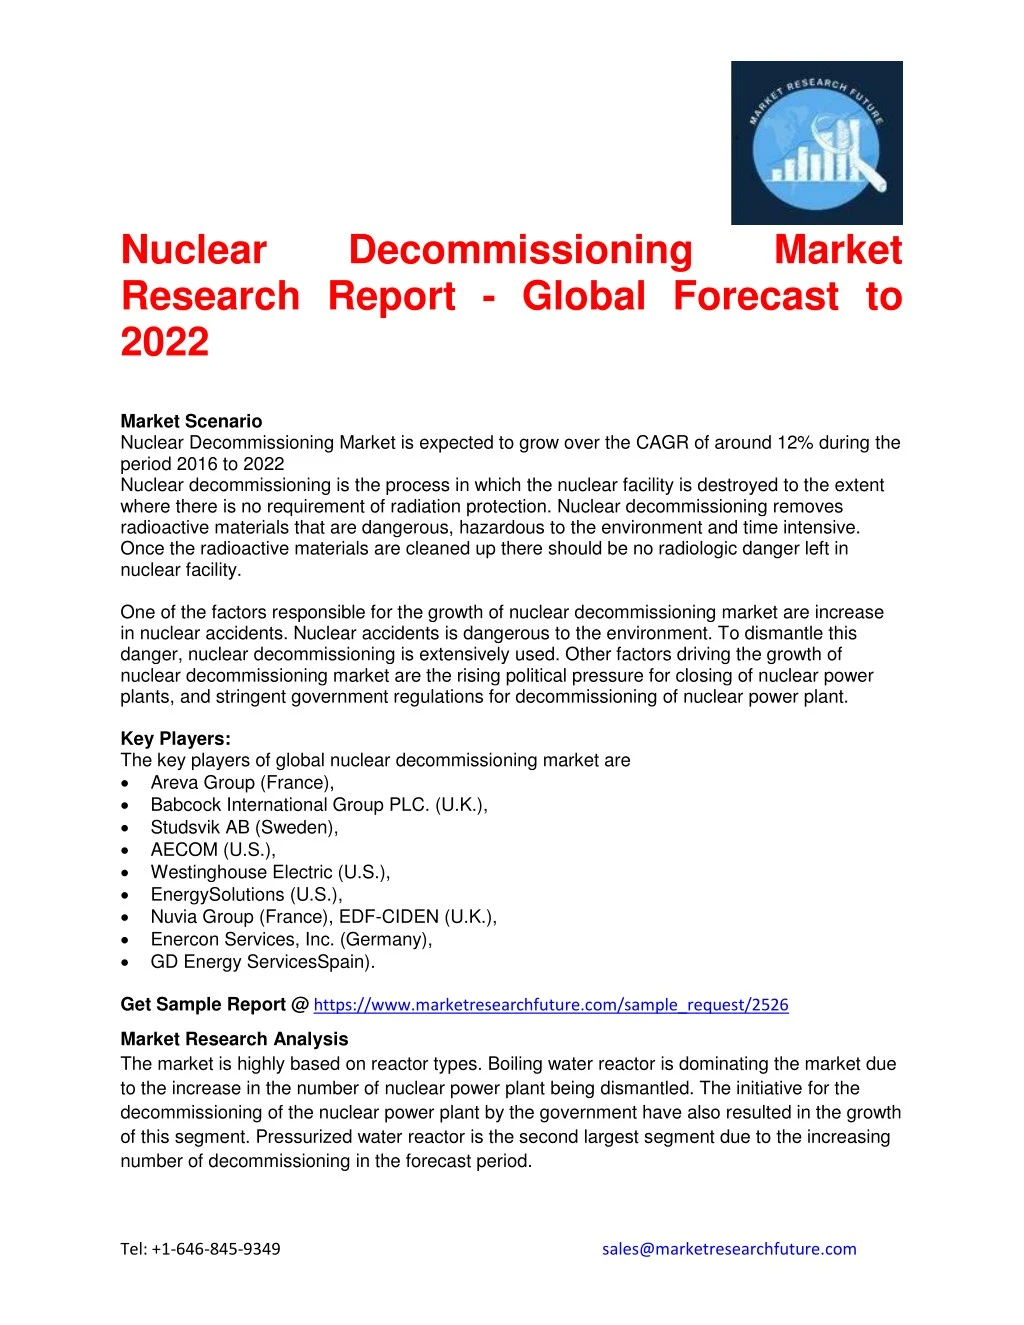 nuclear research report global forecast to 2022